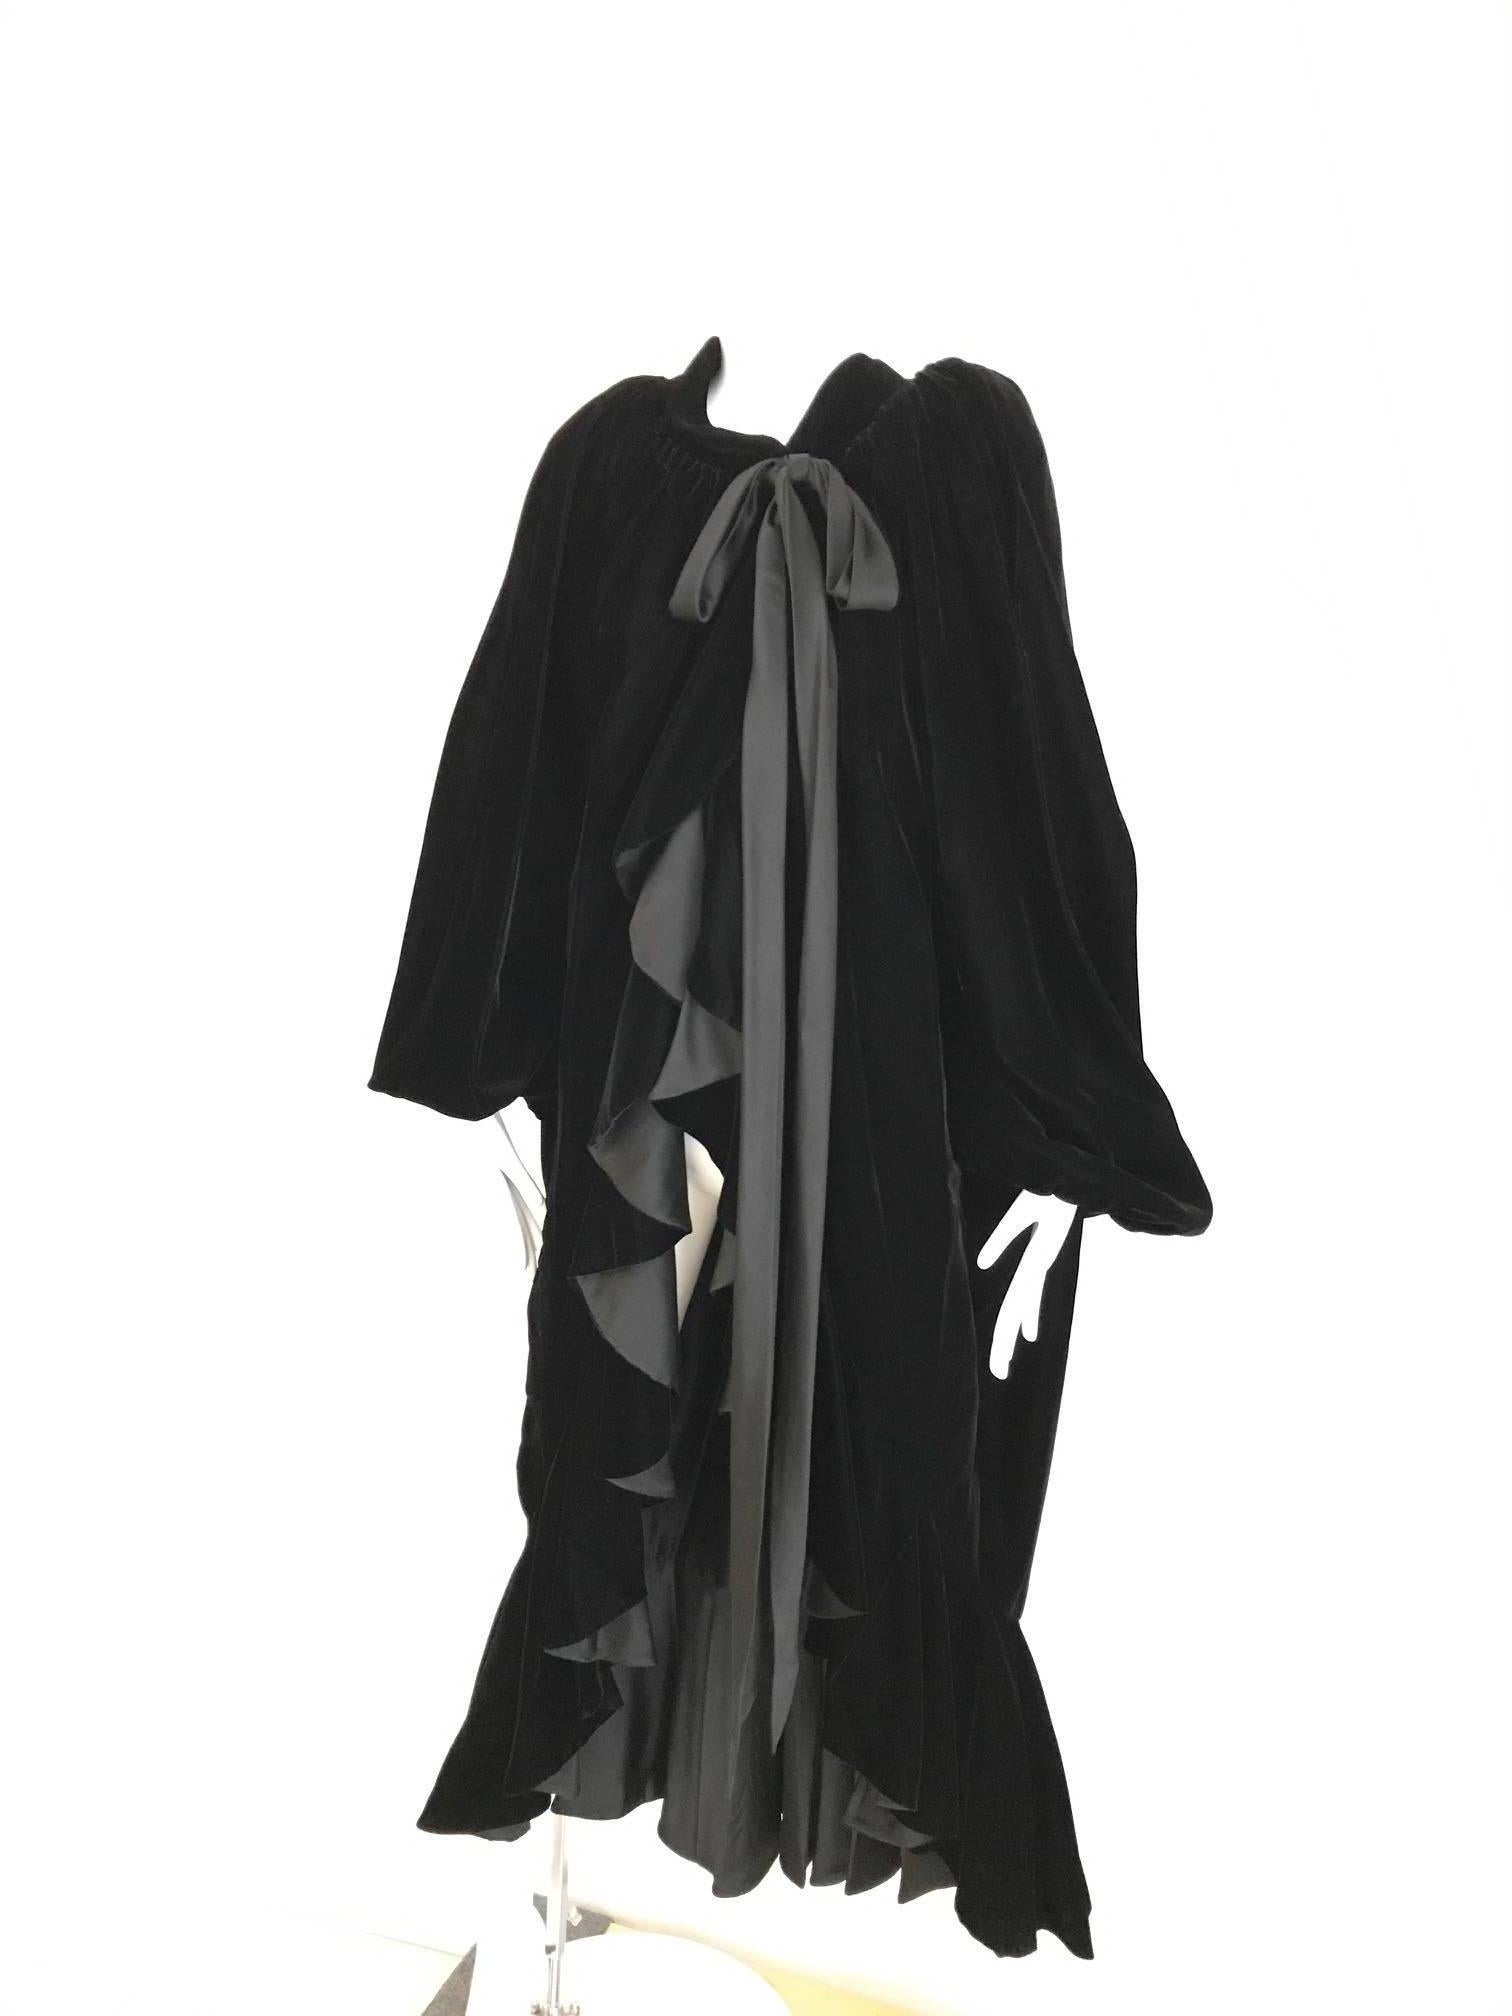 This rare 1980's Yves Saint Laurent black velvet evening coat /cape is the epitome of old world elegance. The design incorporates mild shoulder pads and large billowy sleeves that create the illusion of a cape. There is a very long, thin satin sash